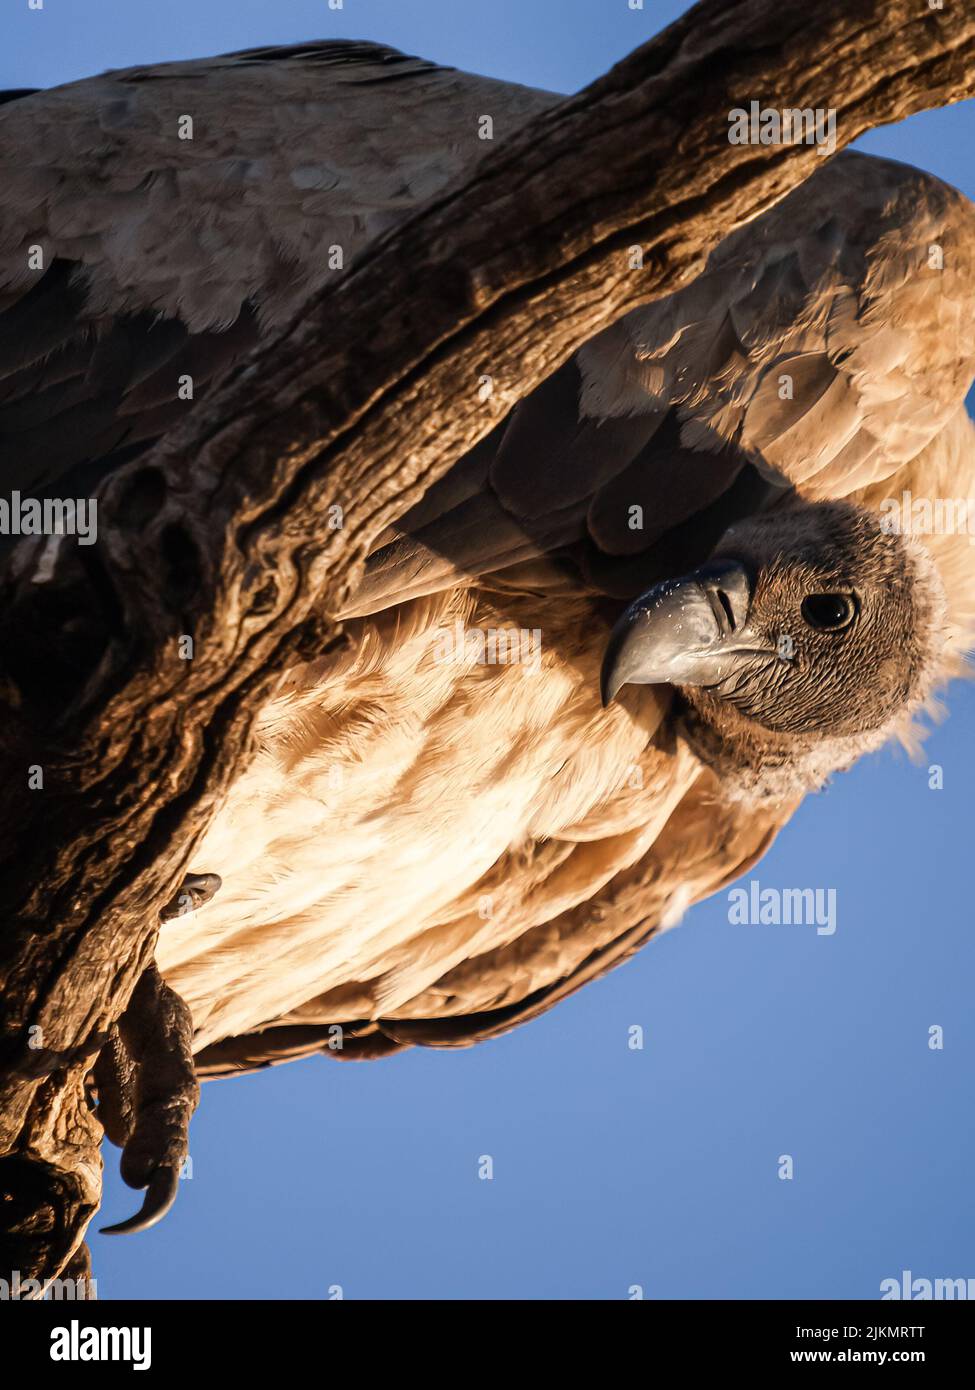 African white backed vulture high in tree against blue sky. Stock Photo